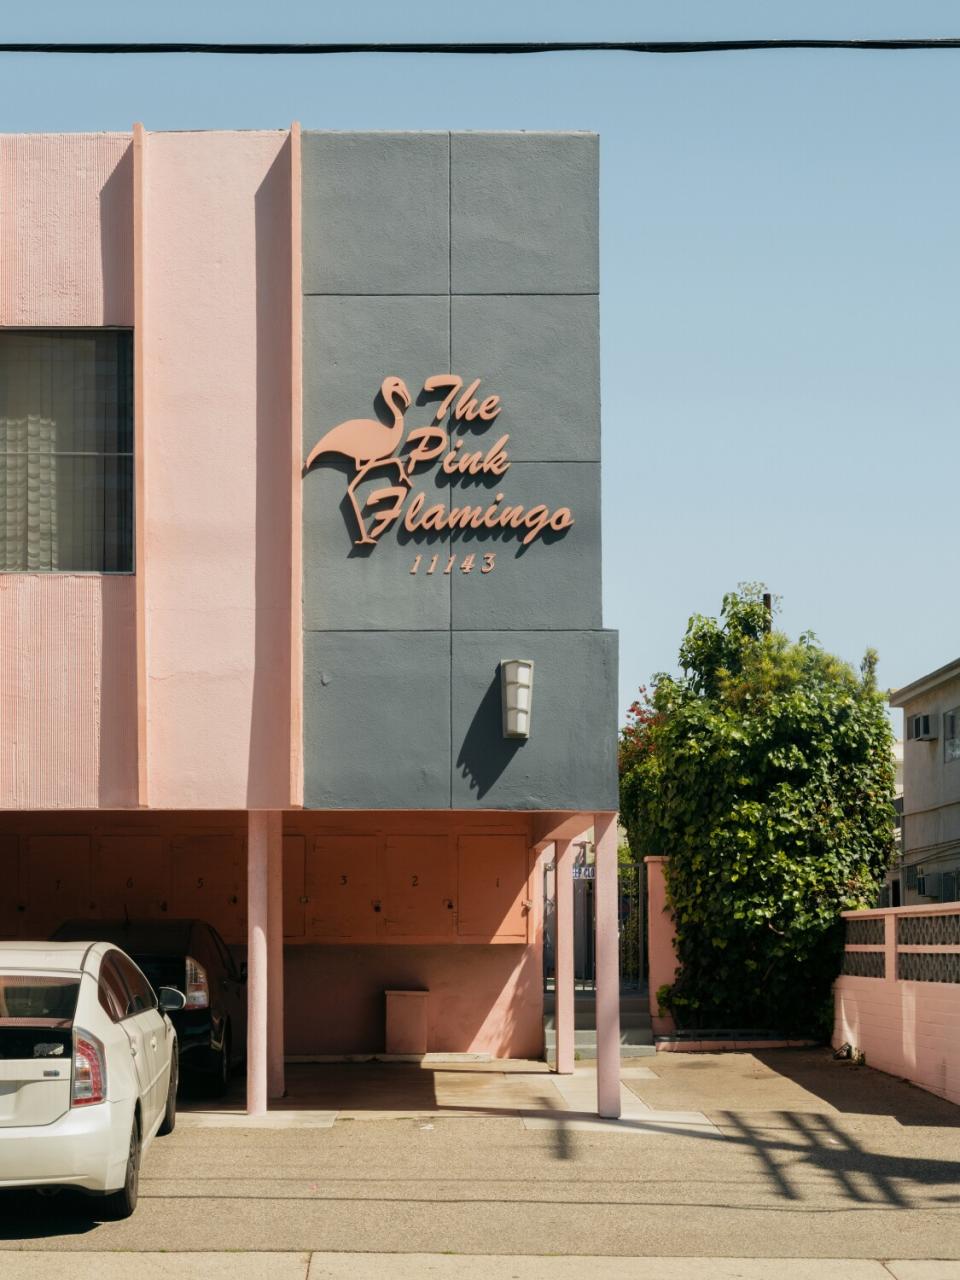 Apartment building sign that reads "The Pink Flamingo 11143"